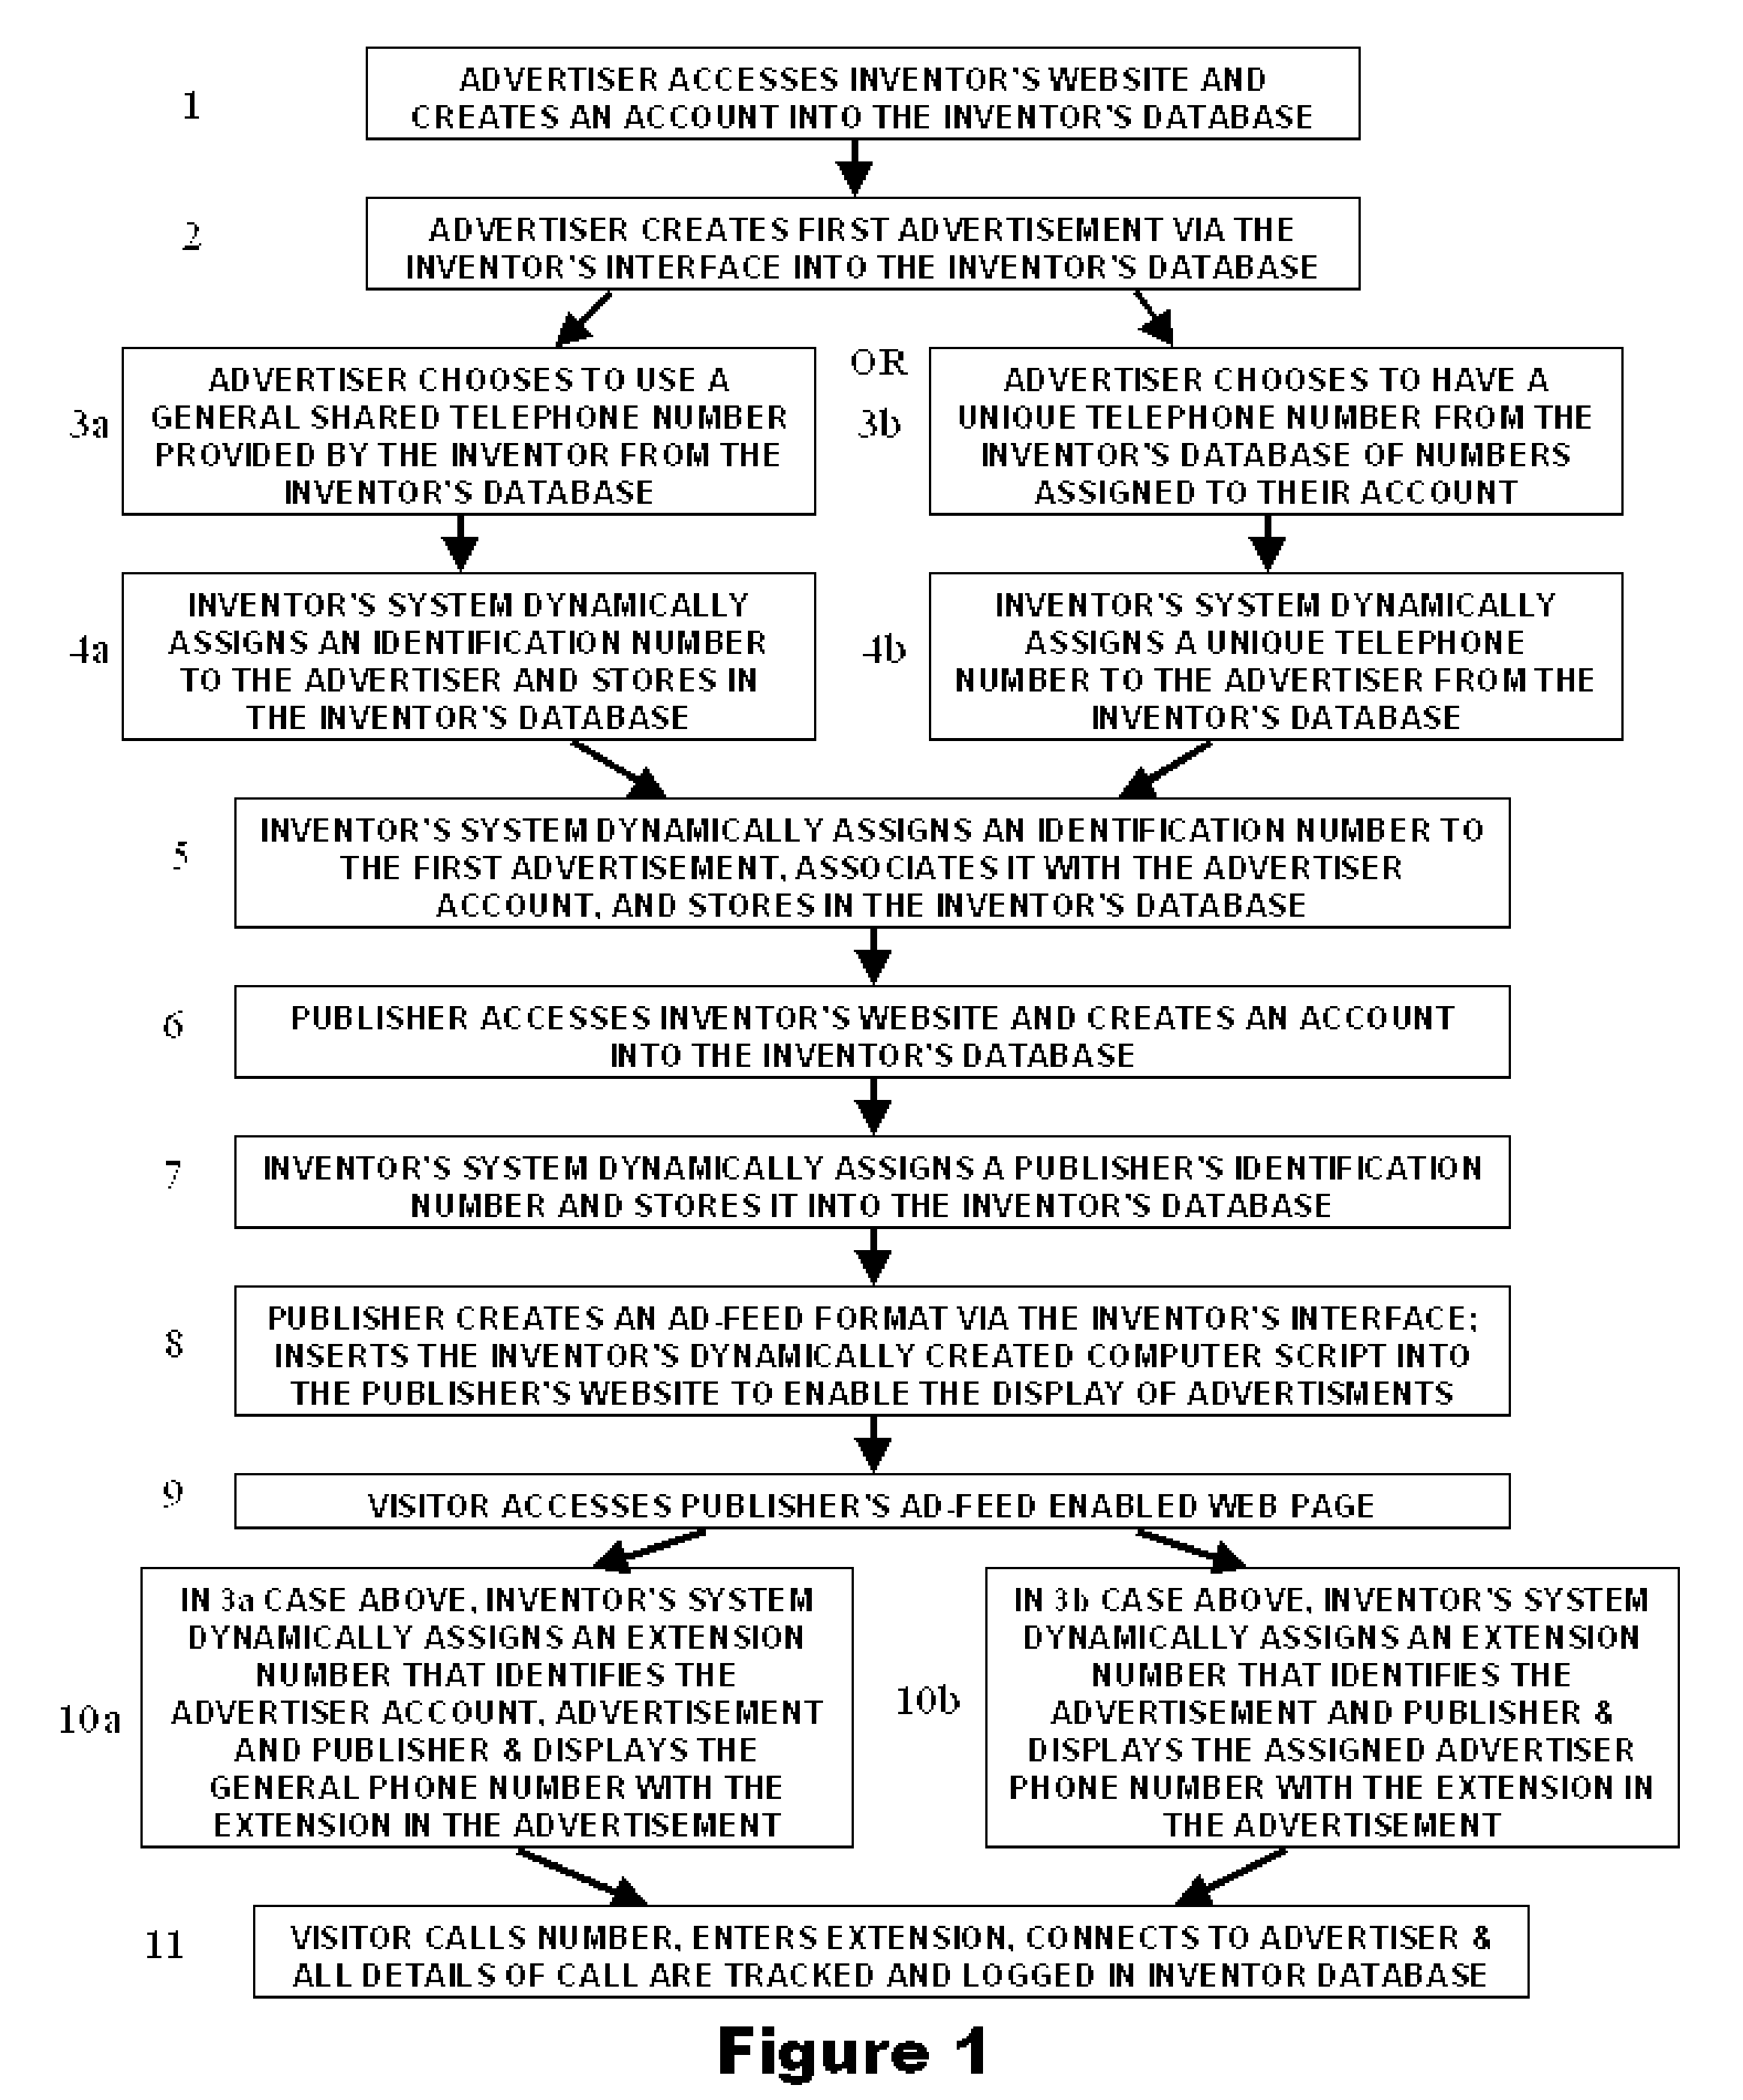 A system and method for automatically assigning an extension number to a telephone number to enable precise, efficient and scalable tracking of the origin of a telephone call from a prospect to an advertiser within a performance advertising multi-advertisement, multi-publisher framework.